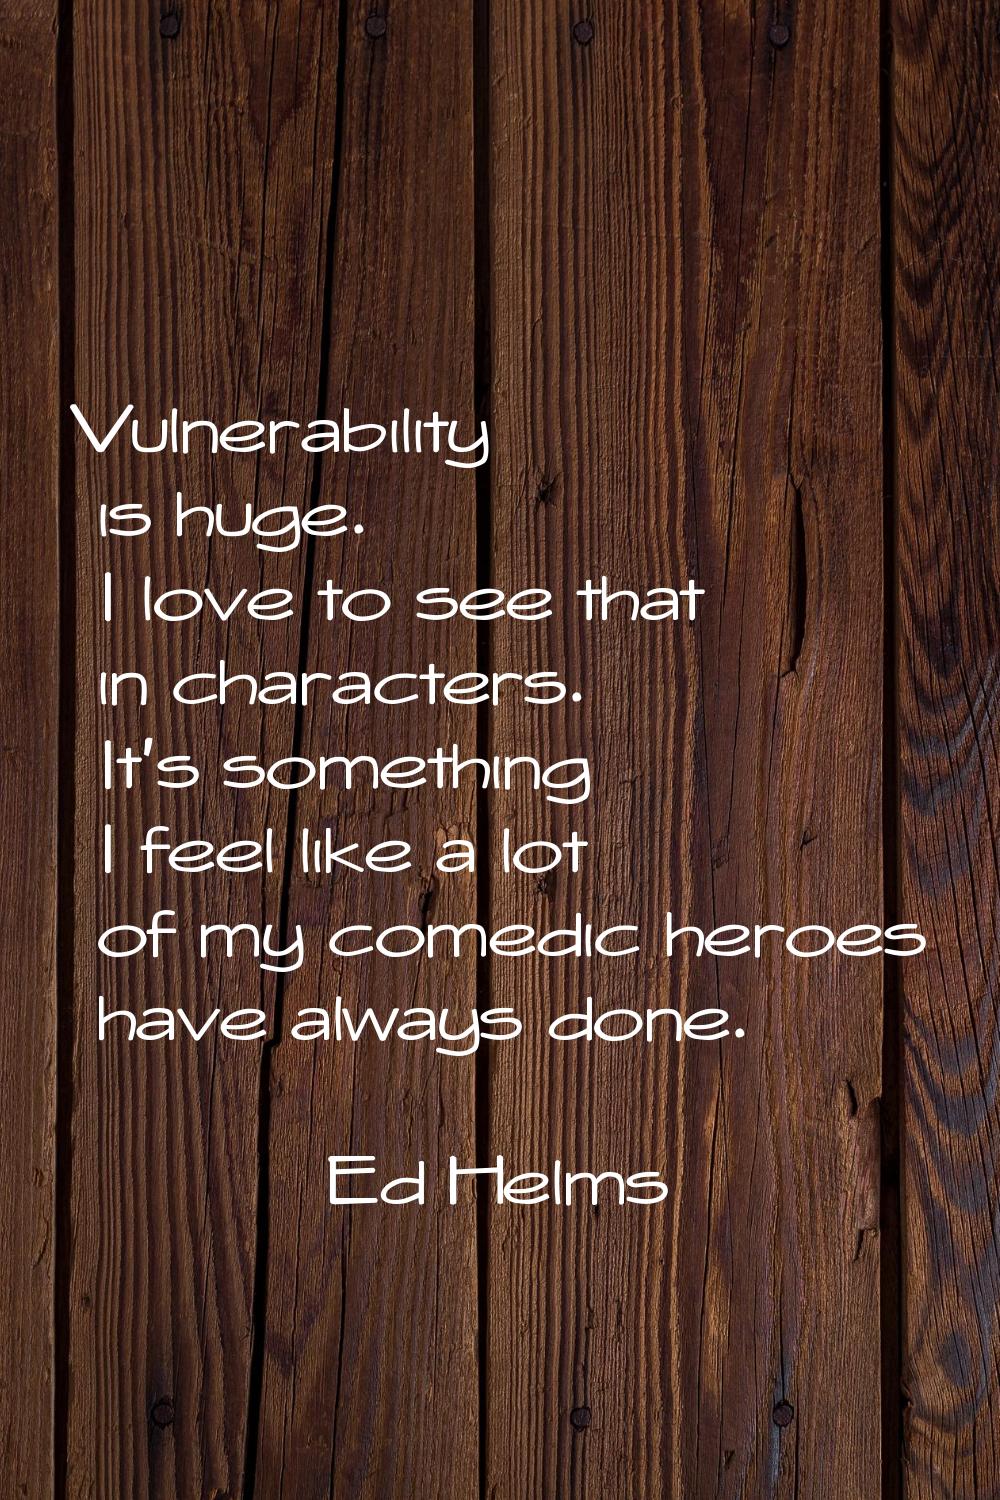 Vulnerability is huge. I love to see that in characters. It's something I feel like a lot of my com